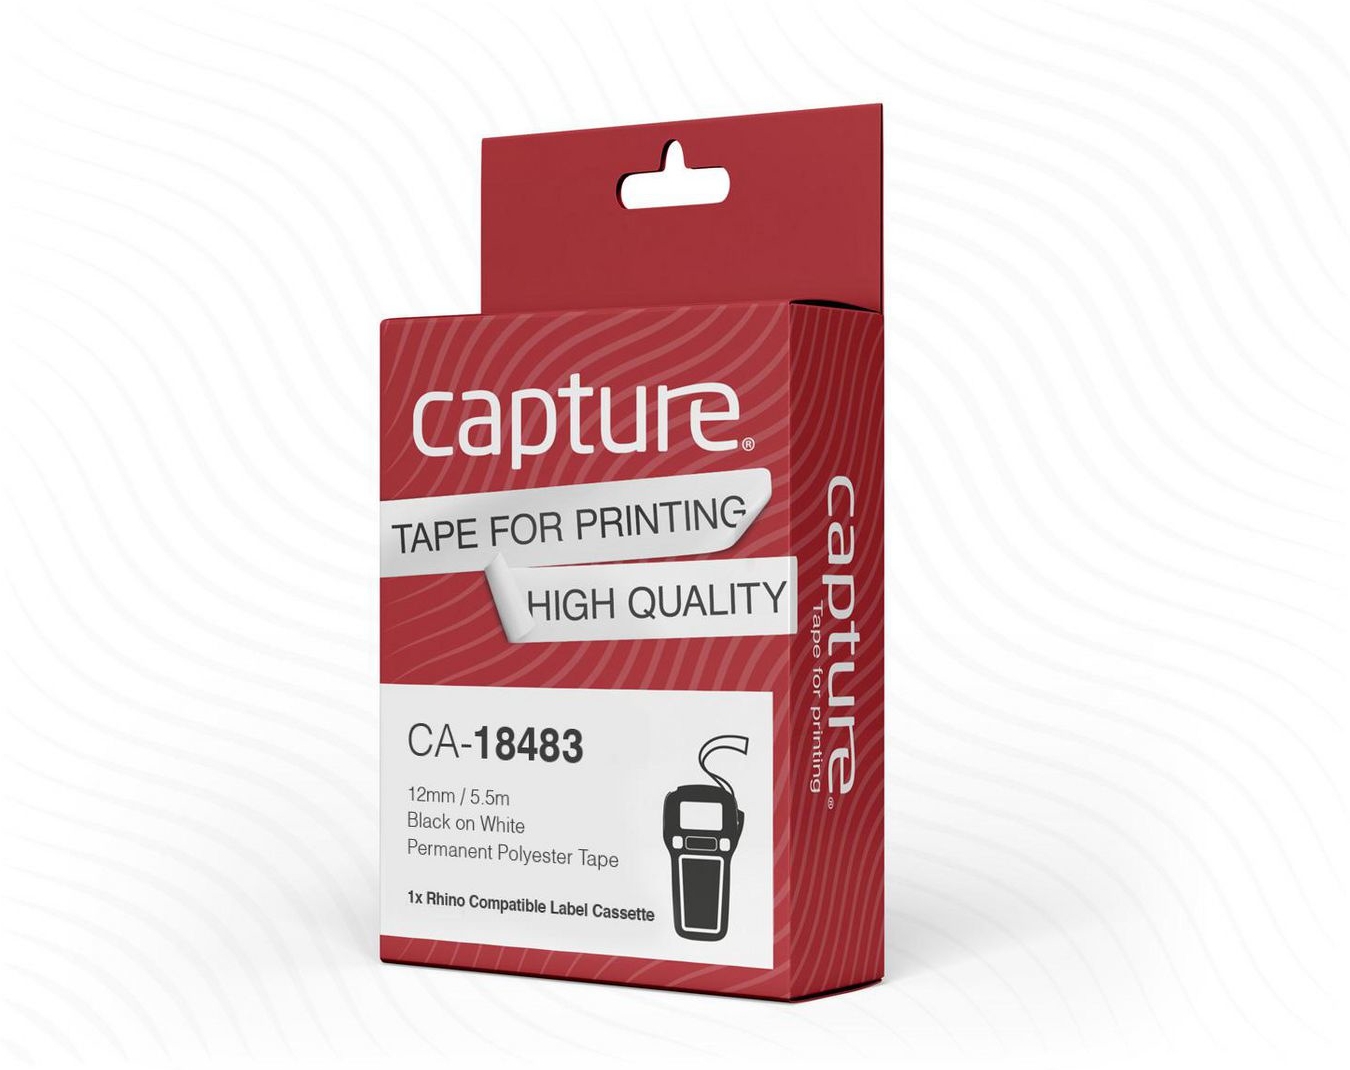 Capture Permanent Polyester Tape